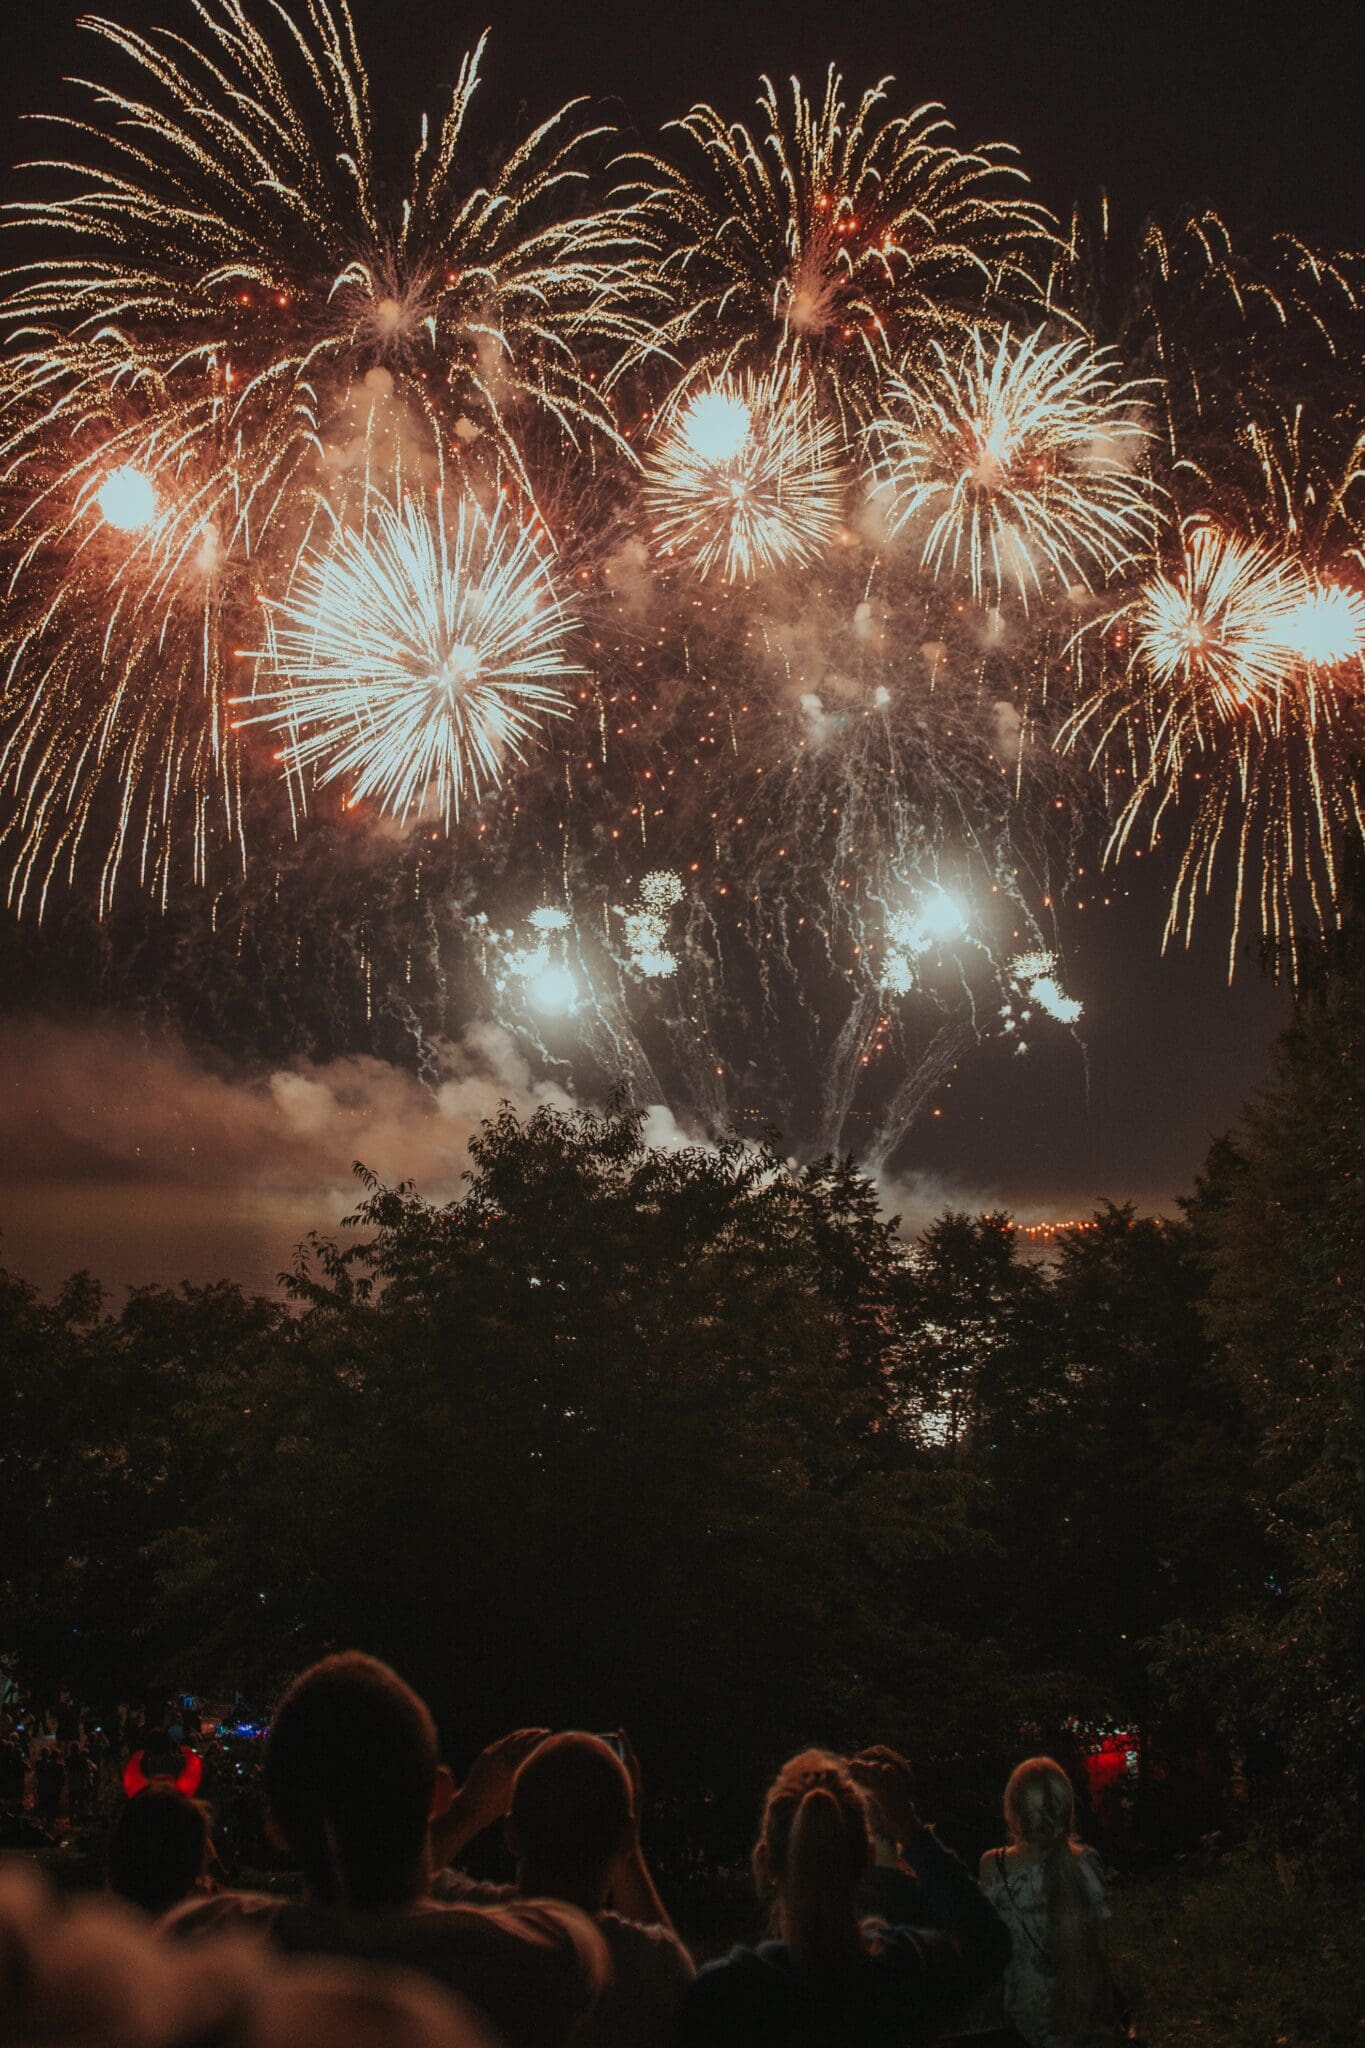 Crowd of people watching beautiful fireworks at a festival.